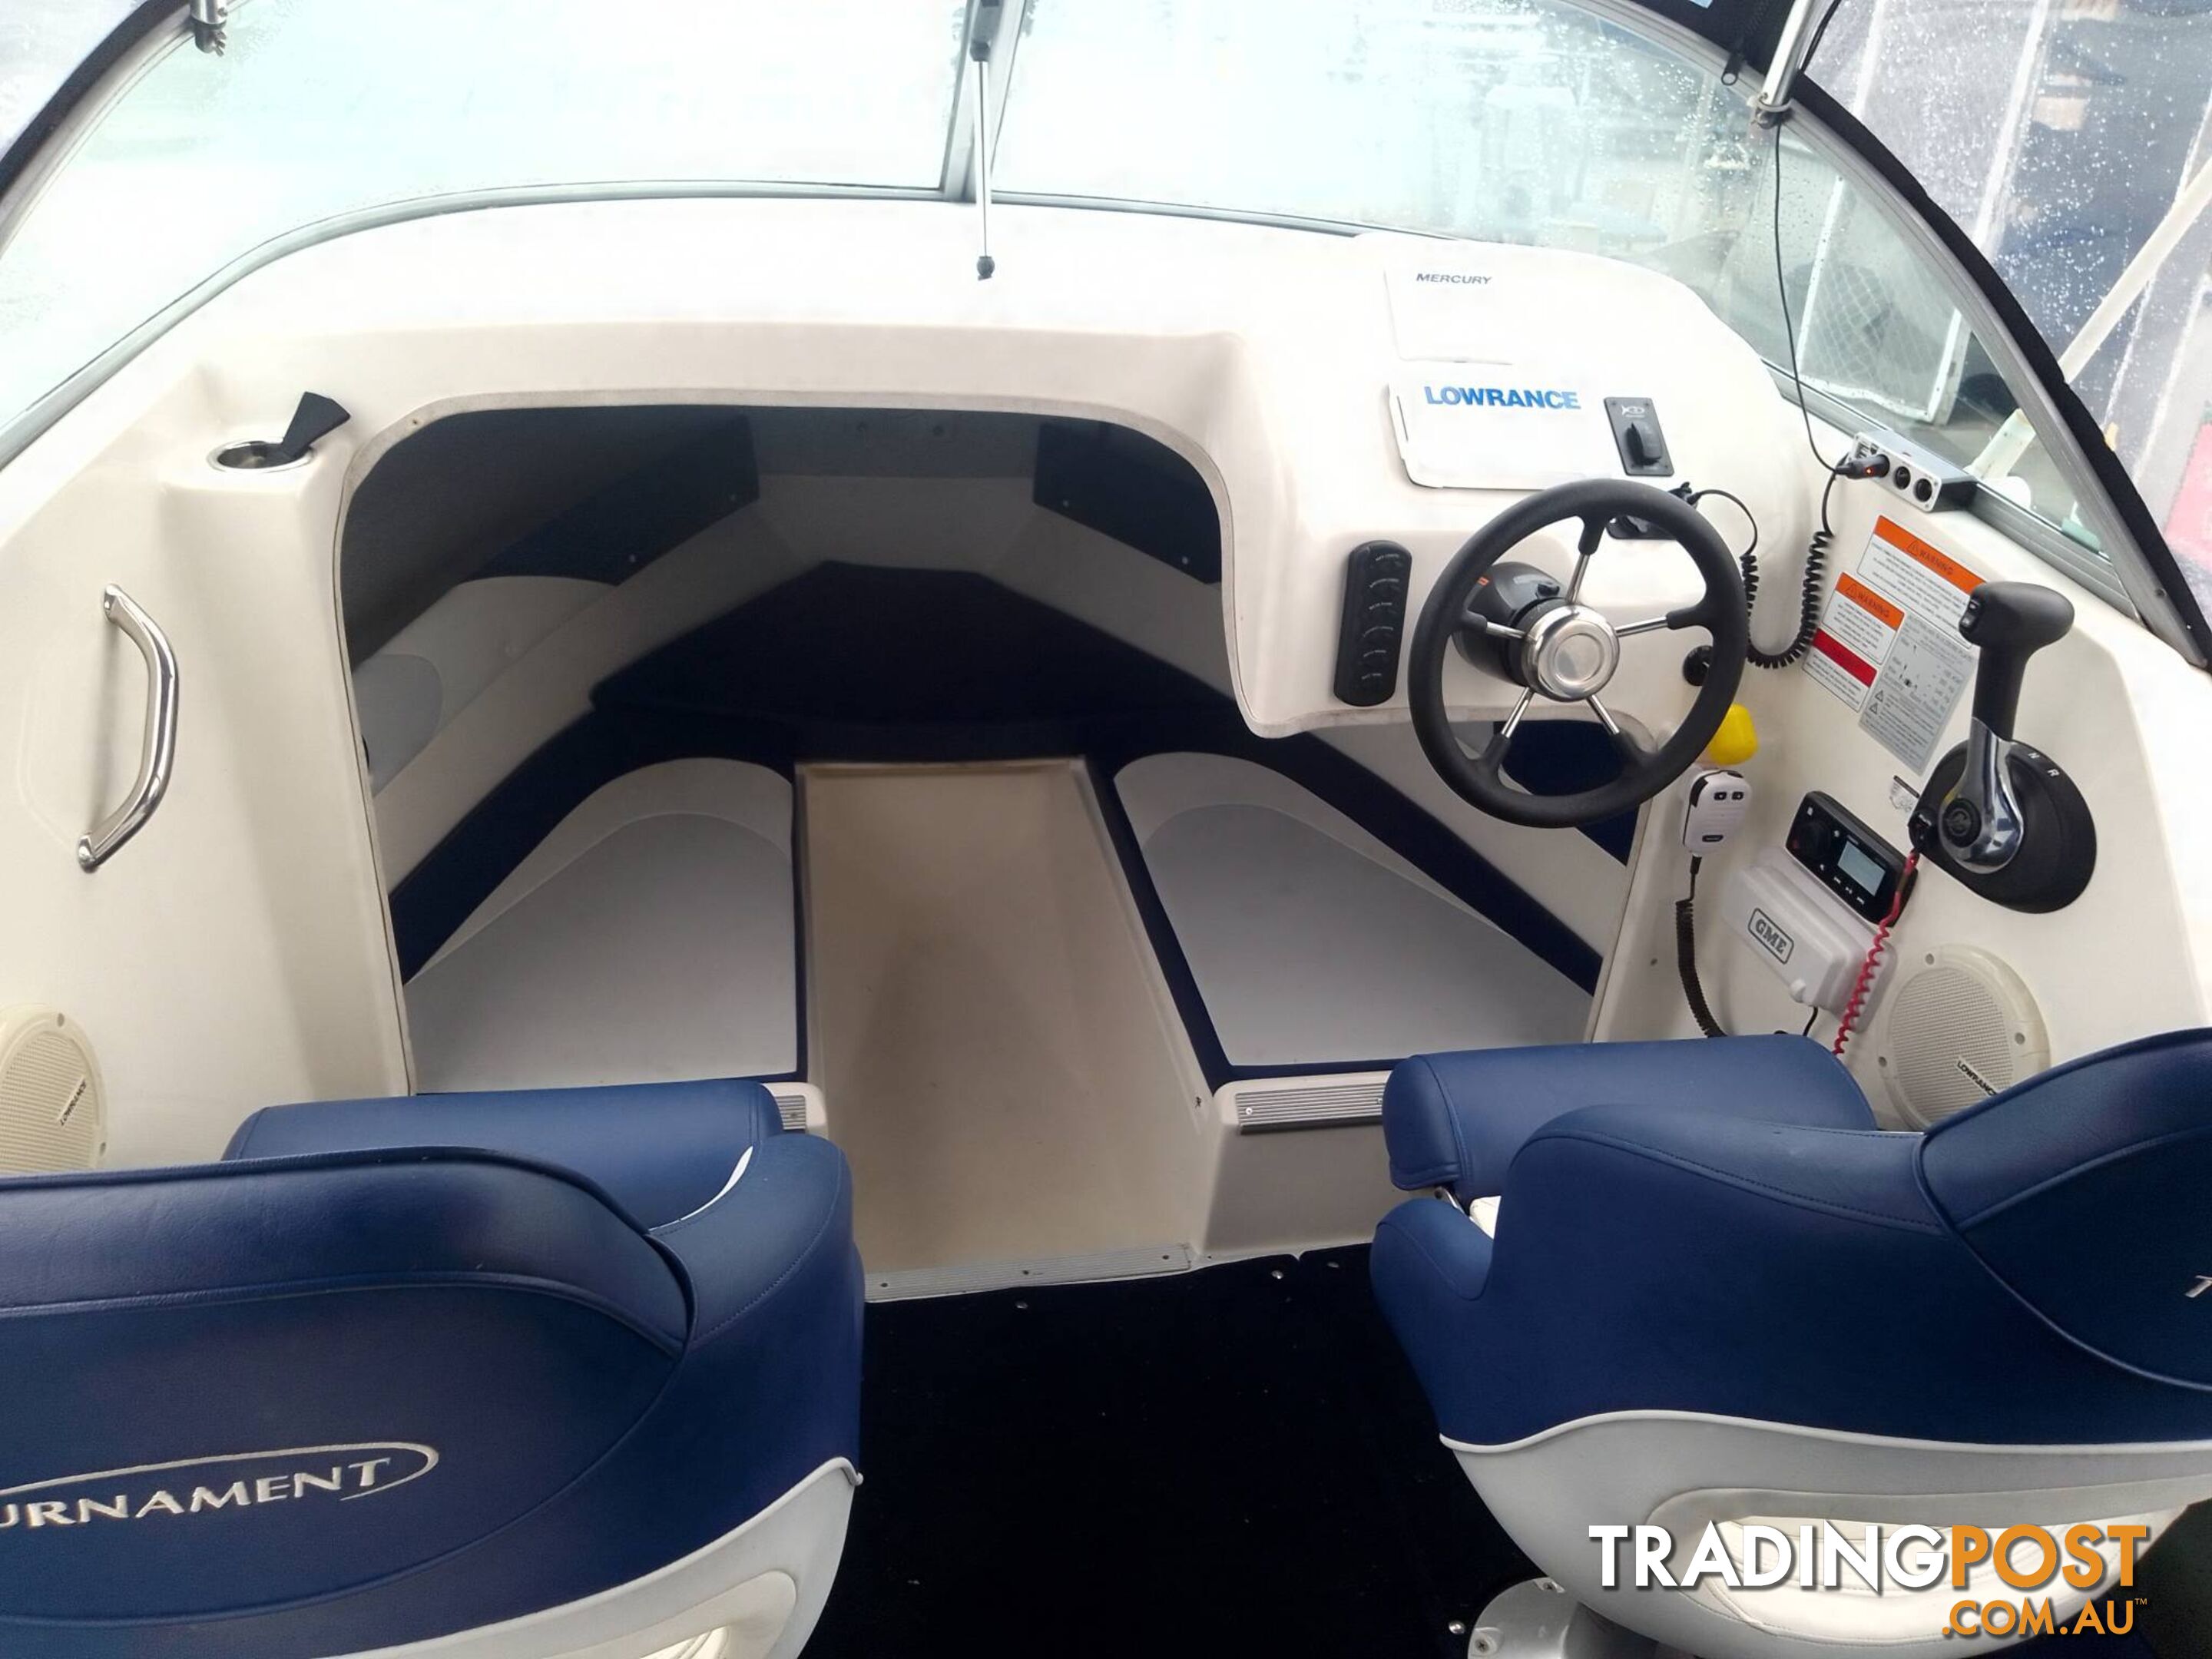 TOURNAMENT 1750 HALF CABIN WITH 115HP MERCURY AND TRAILER